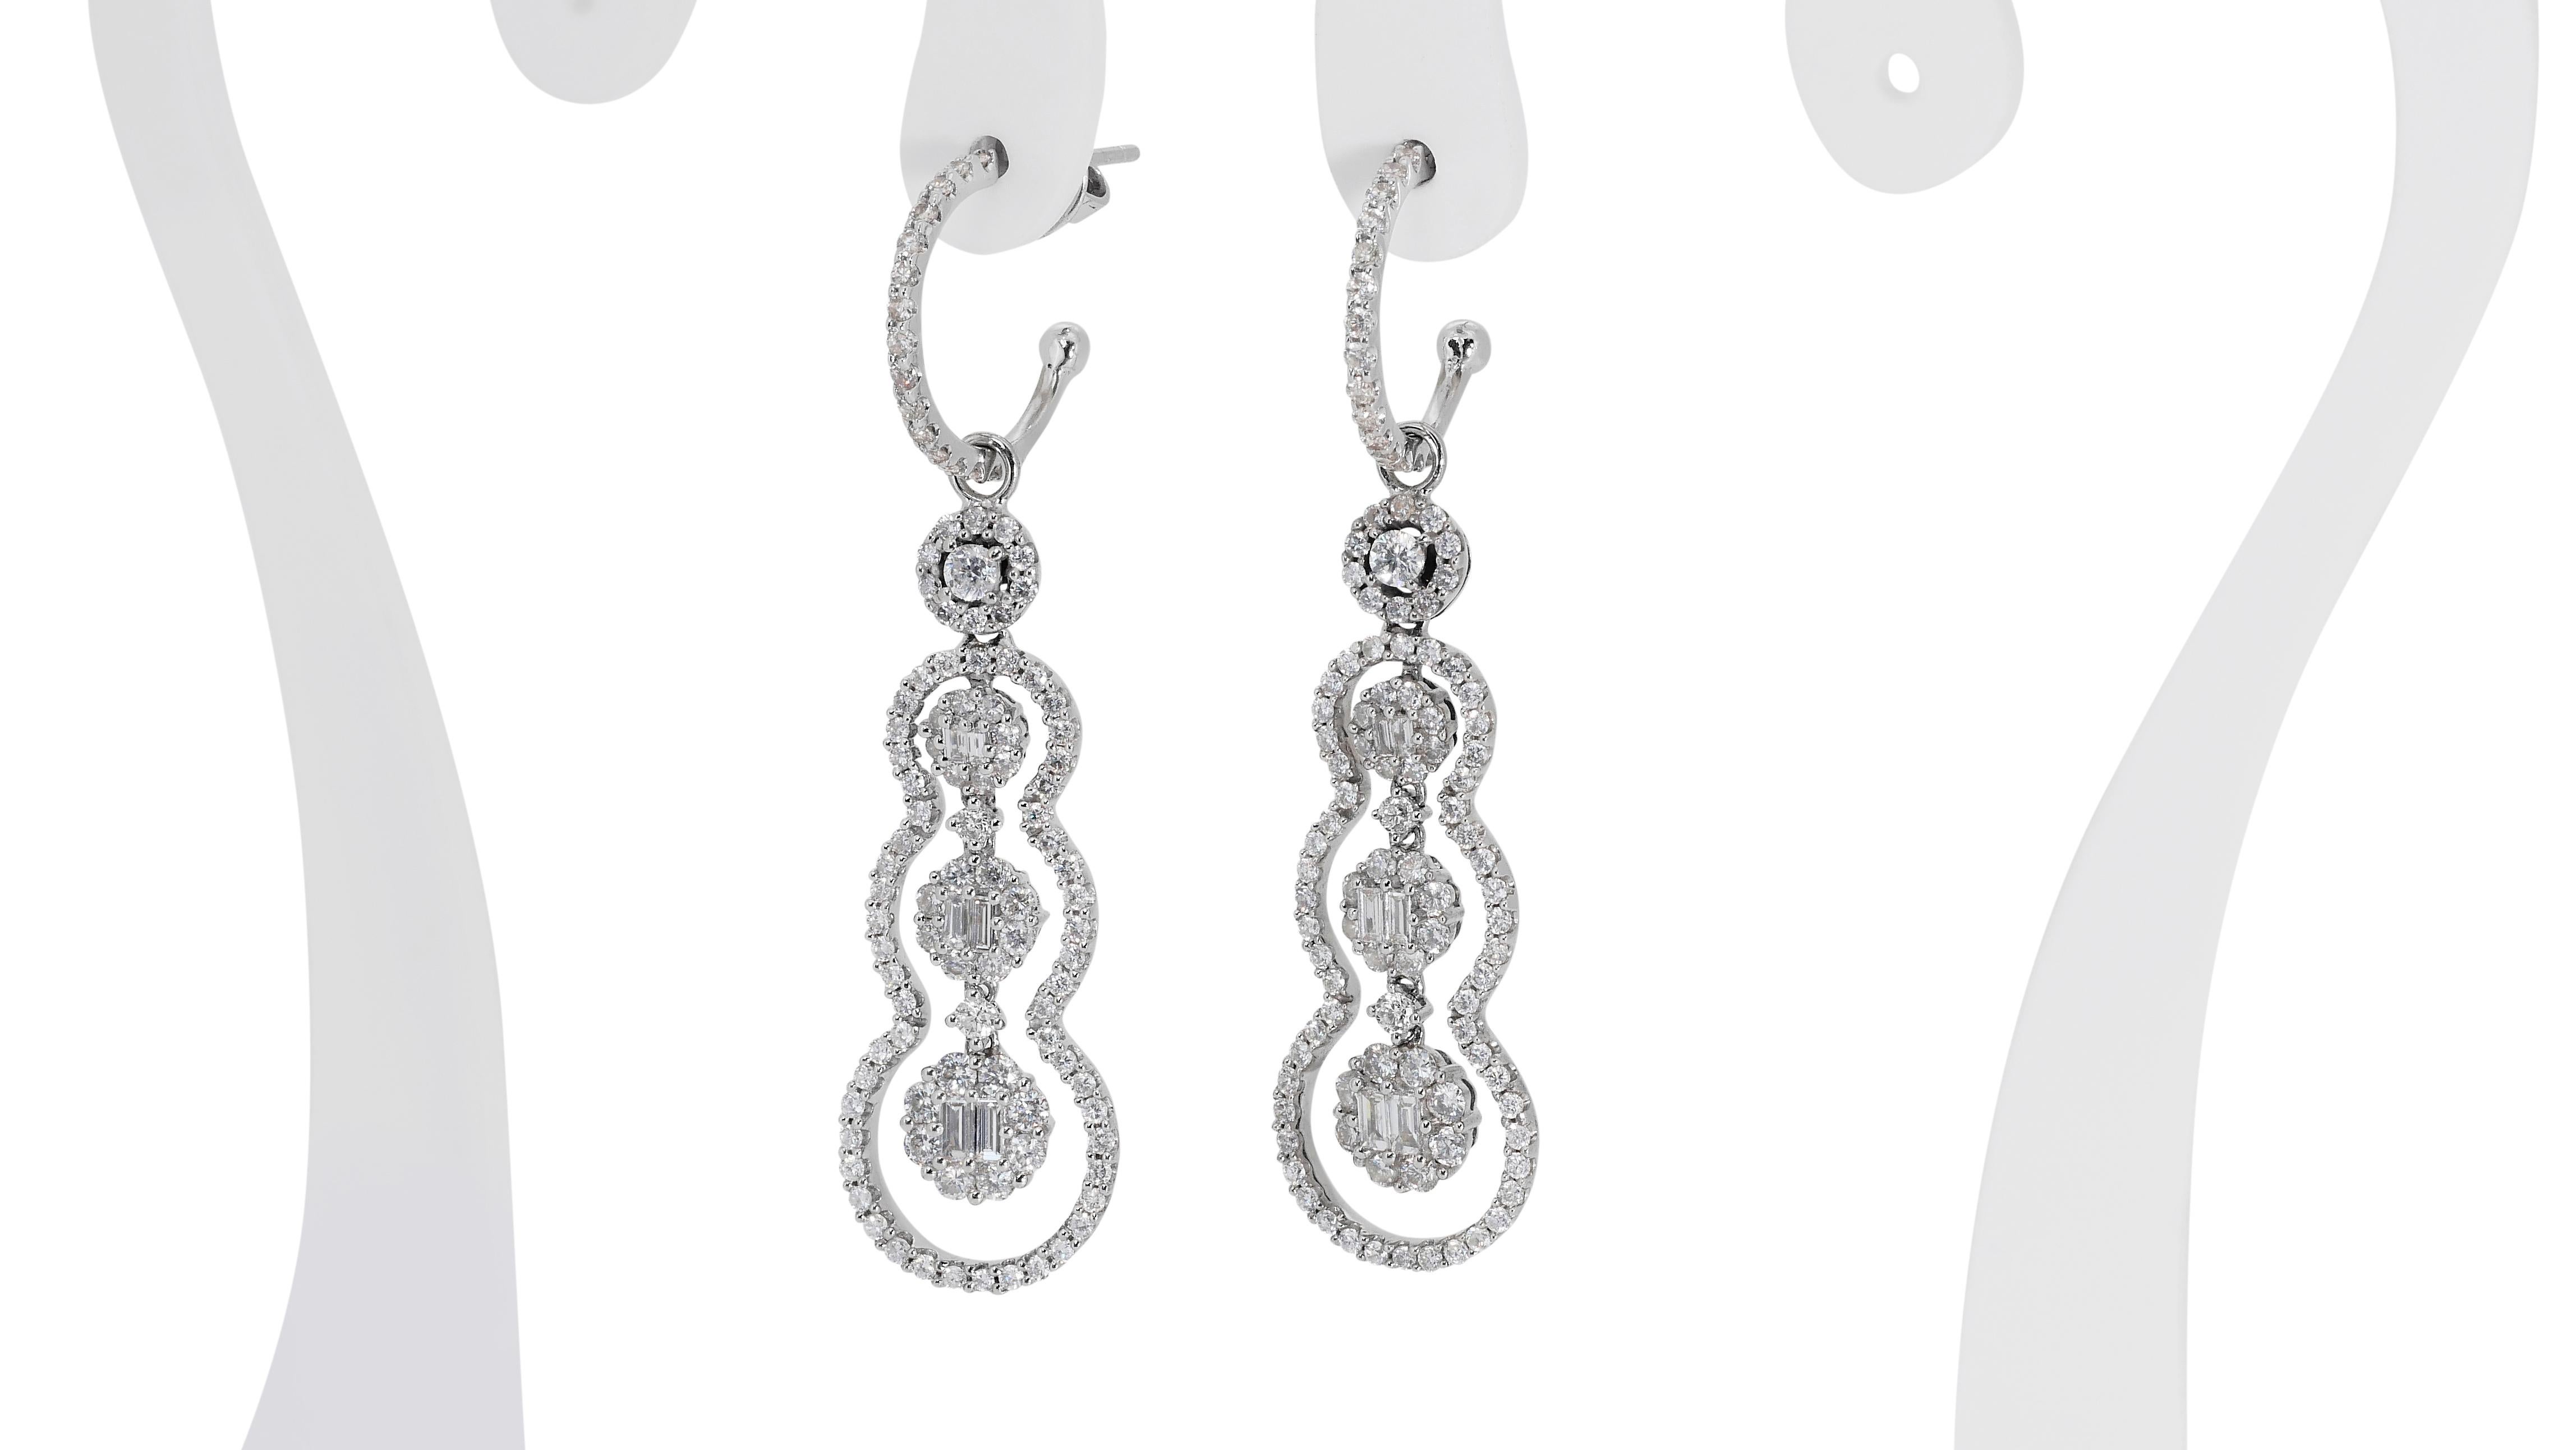 Marvelous 18k White Gold Drop Earrings w/ 3.5ct Natural Diamonds AIG Certificate In New Condition For Sale In רמת גן, IL